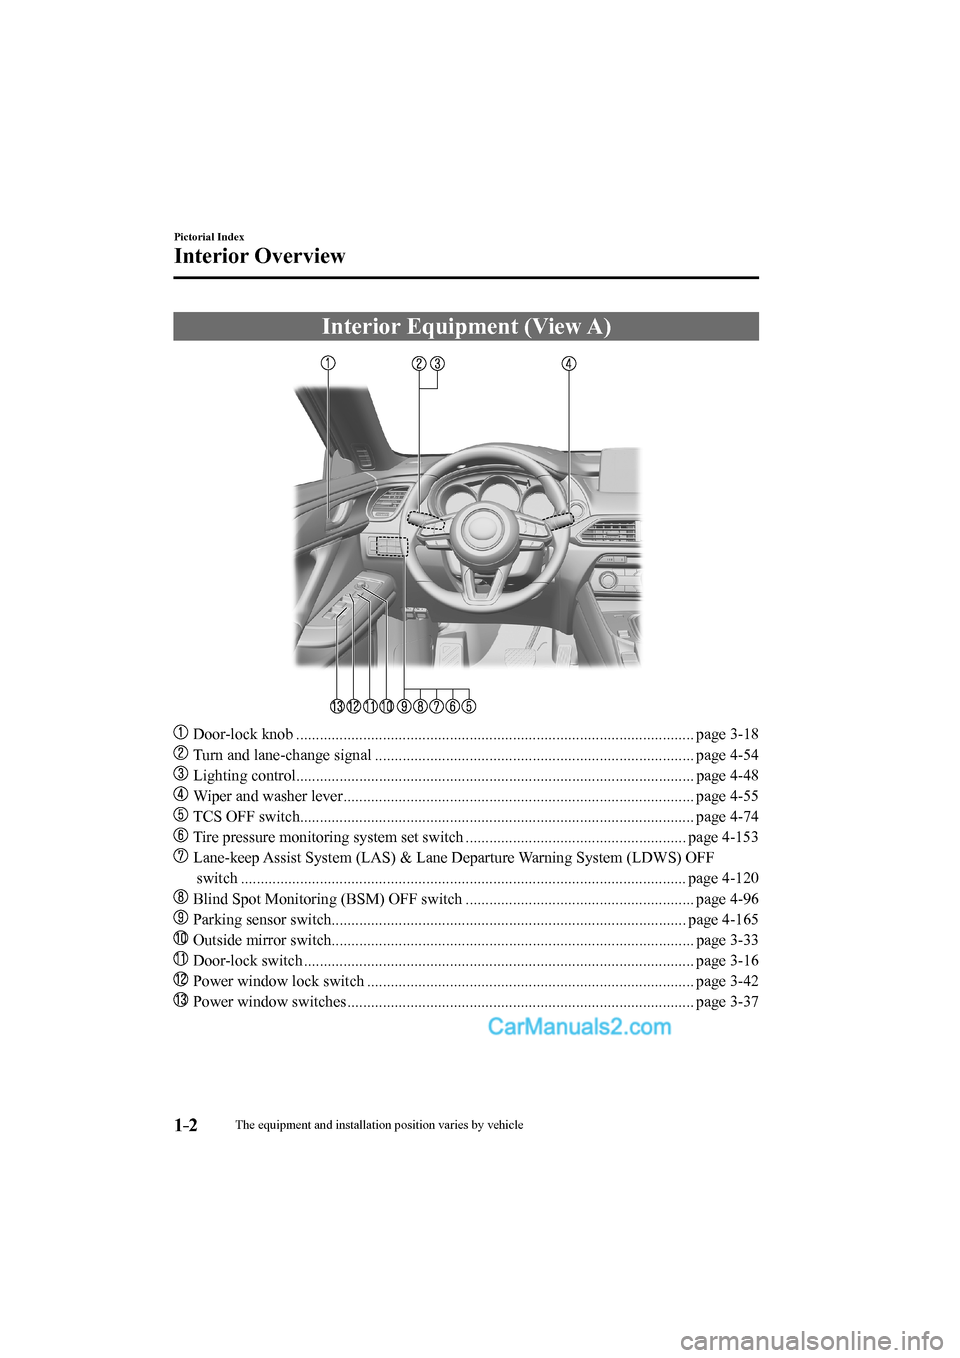 MAZDA MODEL CX-9 2017  Owners Manual (in English) 1–2
Pictorial Index
Interior Overview
      Interior  Equipment  (View  A)
    
���
  Door-lock knob ..............................................................................................